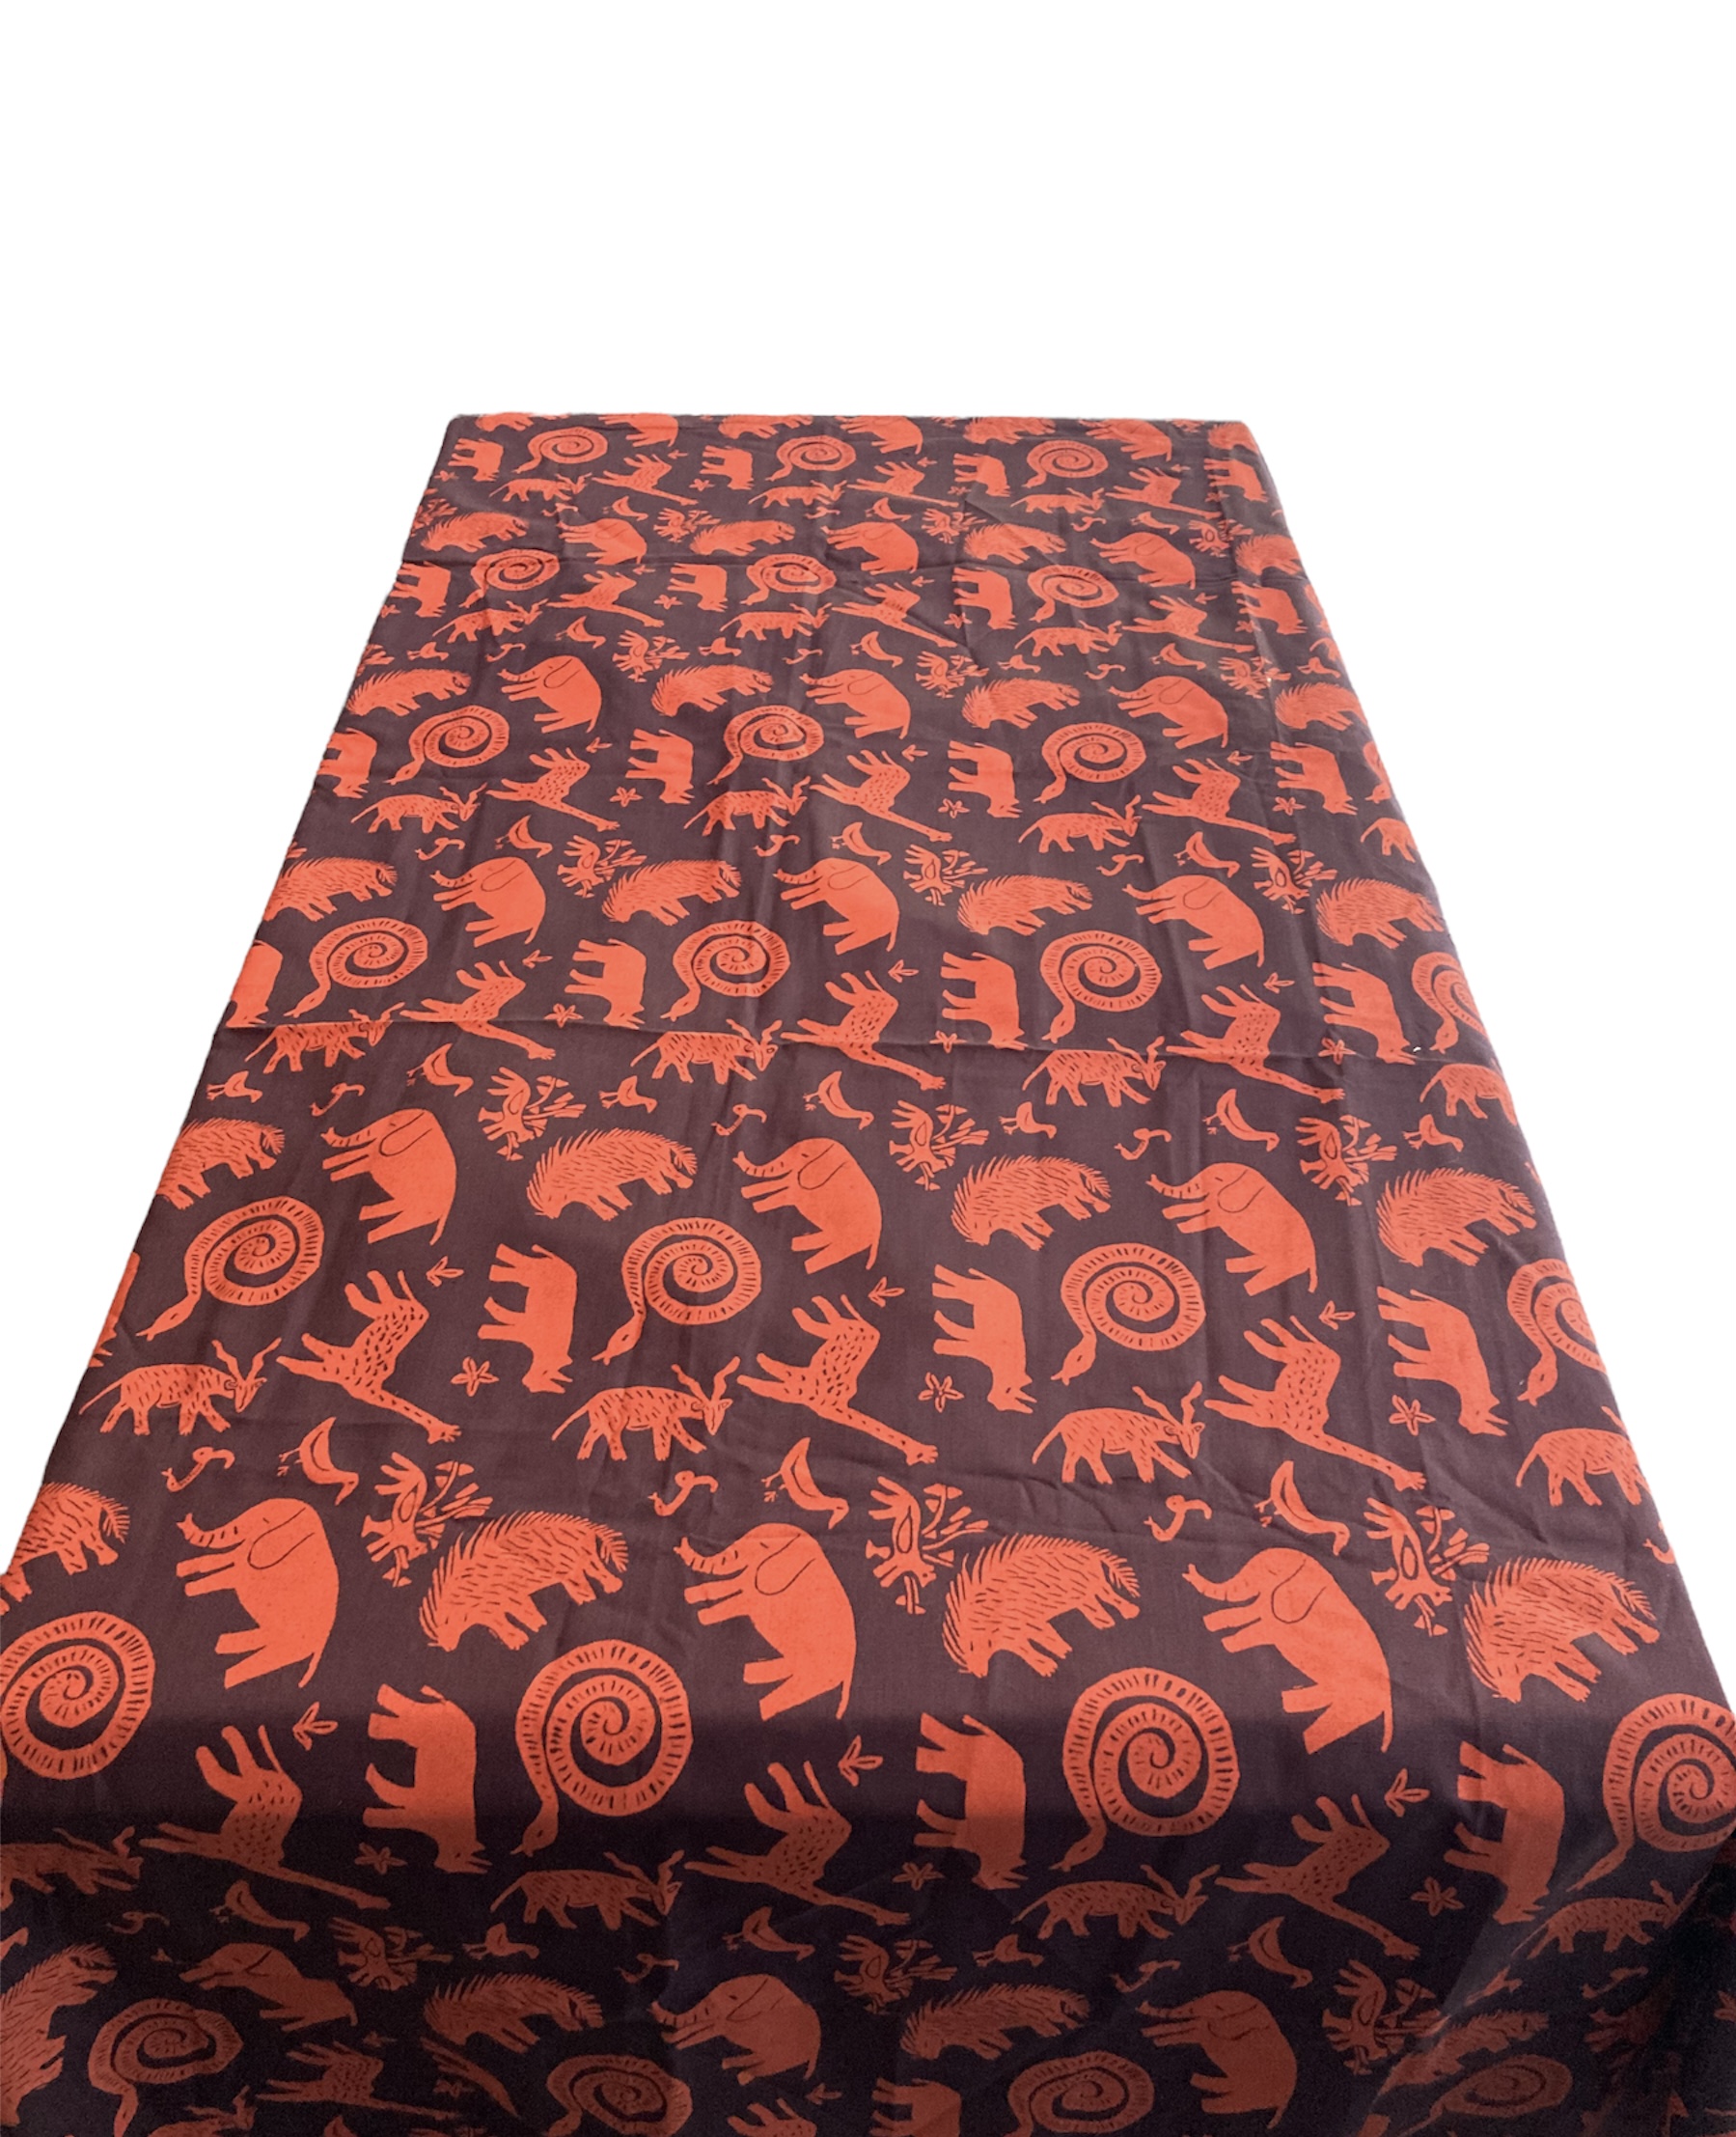 100% cotton Tablecloth approx. 98" x 57" from Namibia - # rb15t